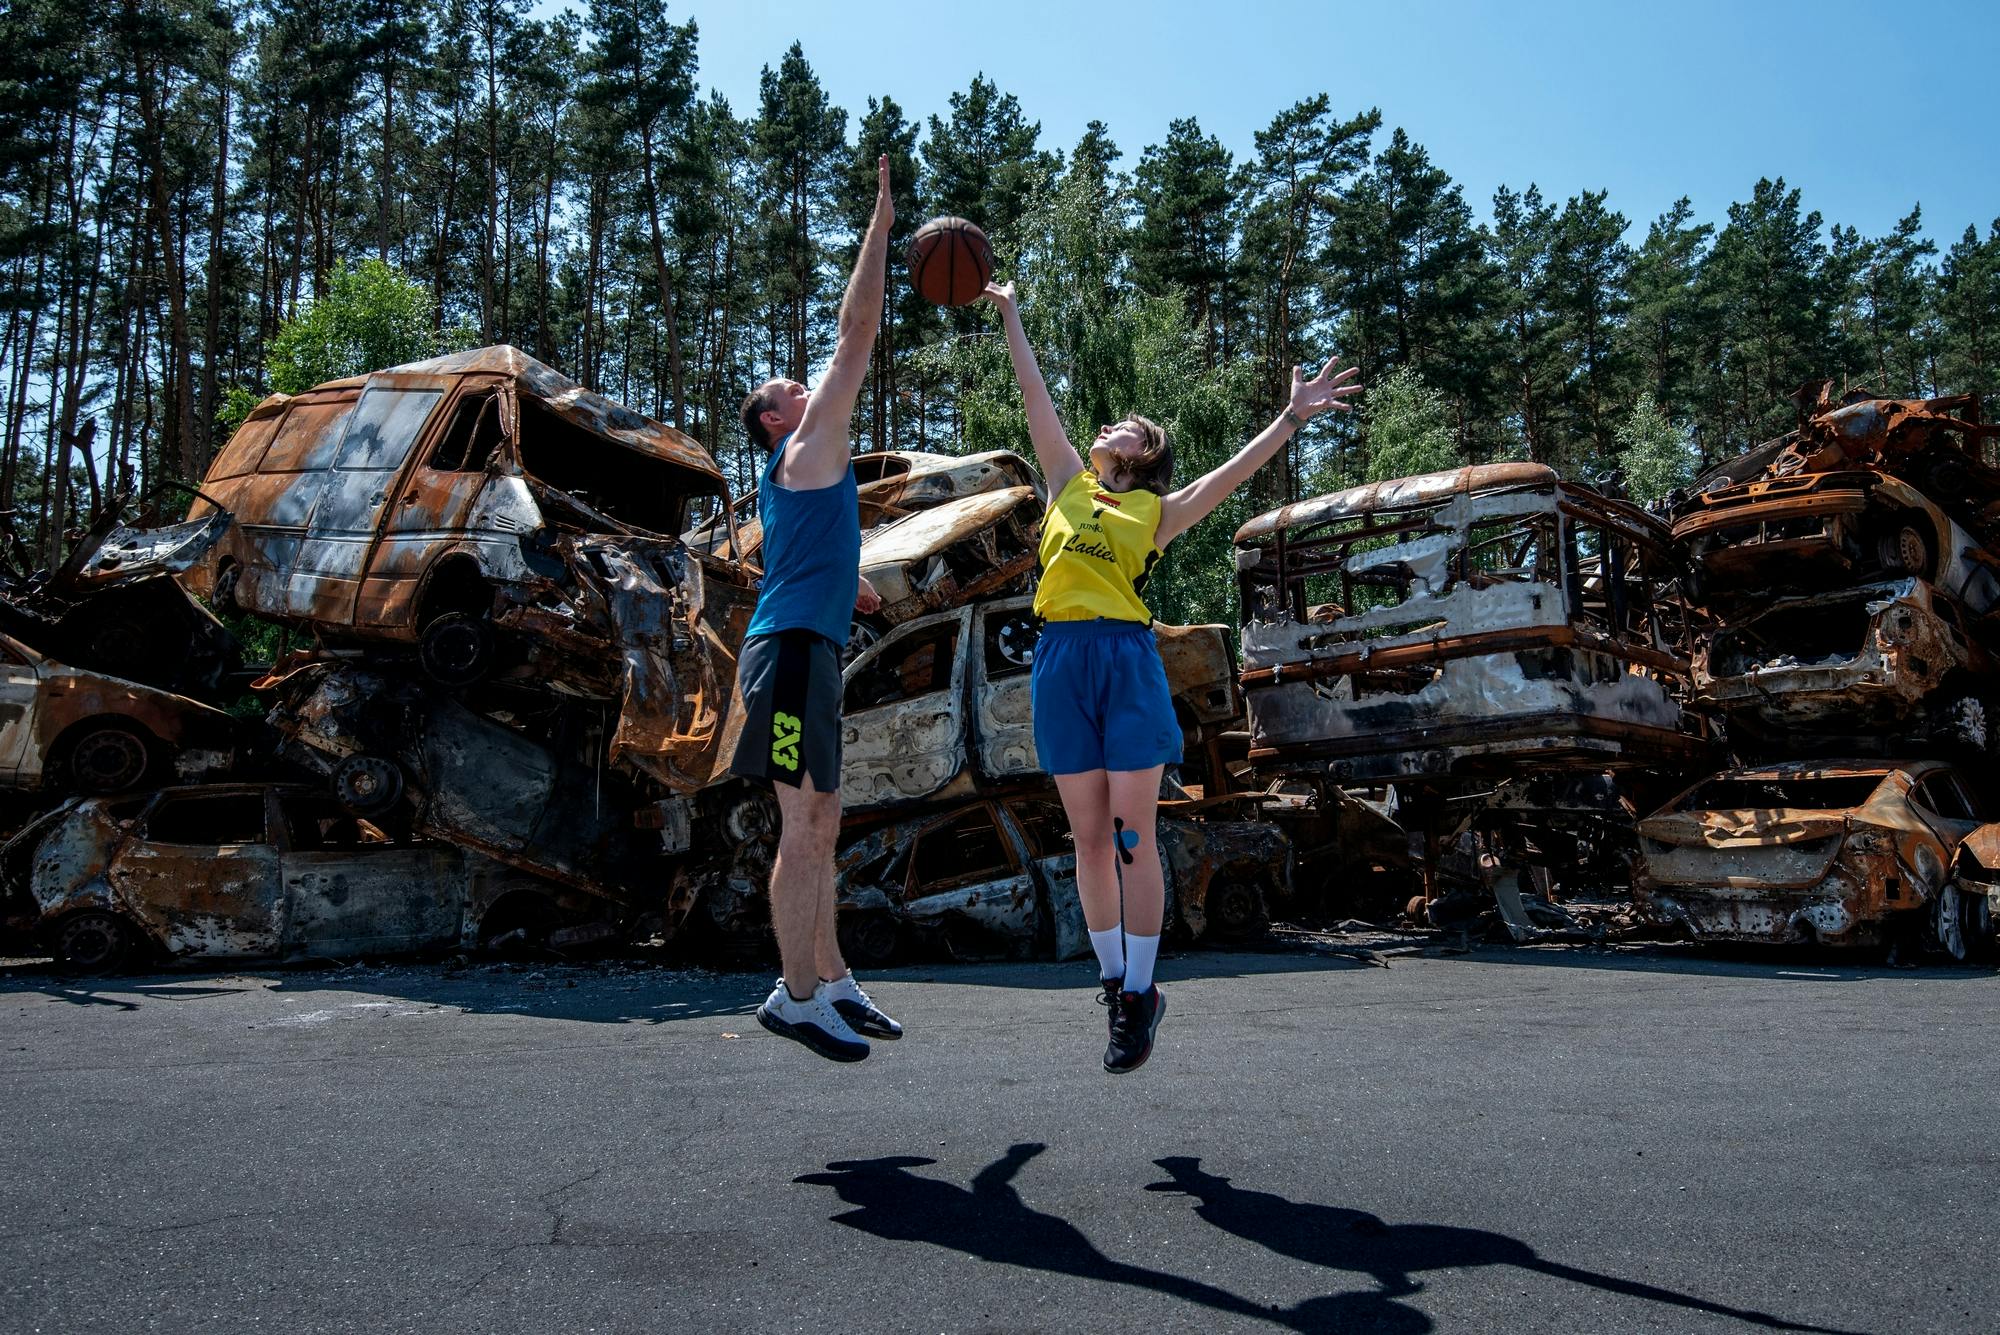 In Irpin, a Kyiv suburb, there are a lot of burned out cars with a wall made out of them, so that a road is visible. Next to them, there is a space big enough to play basketball on.